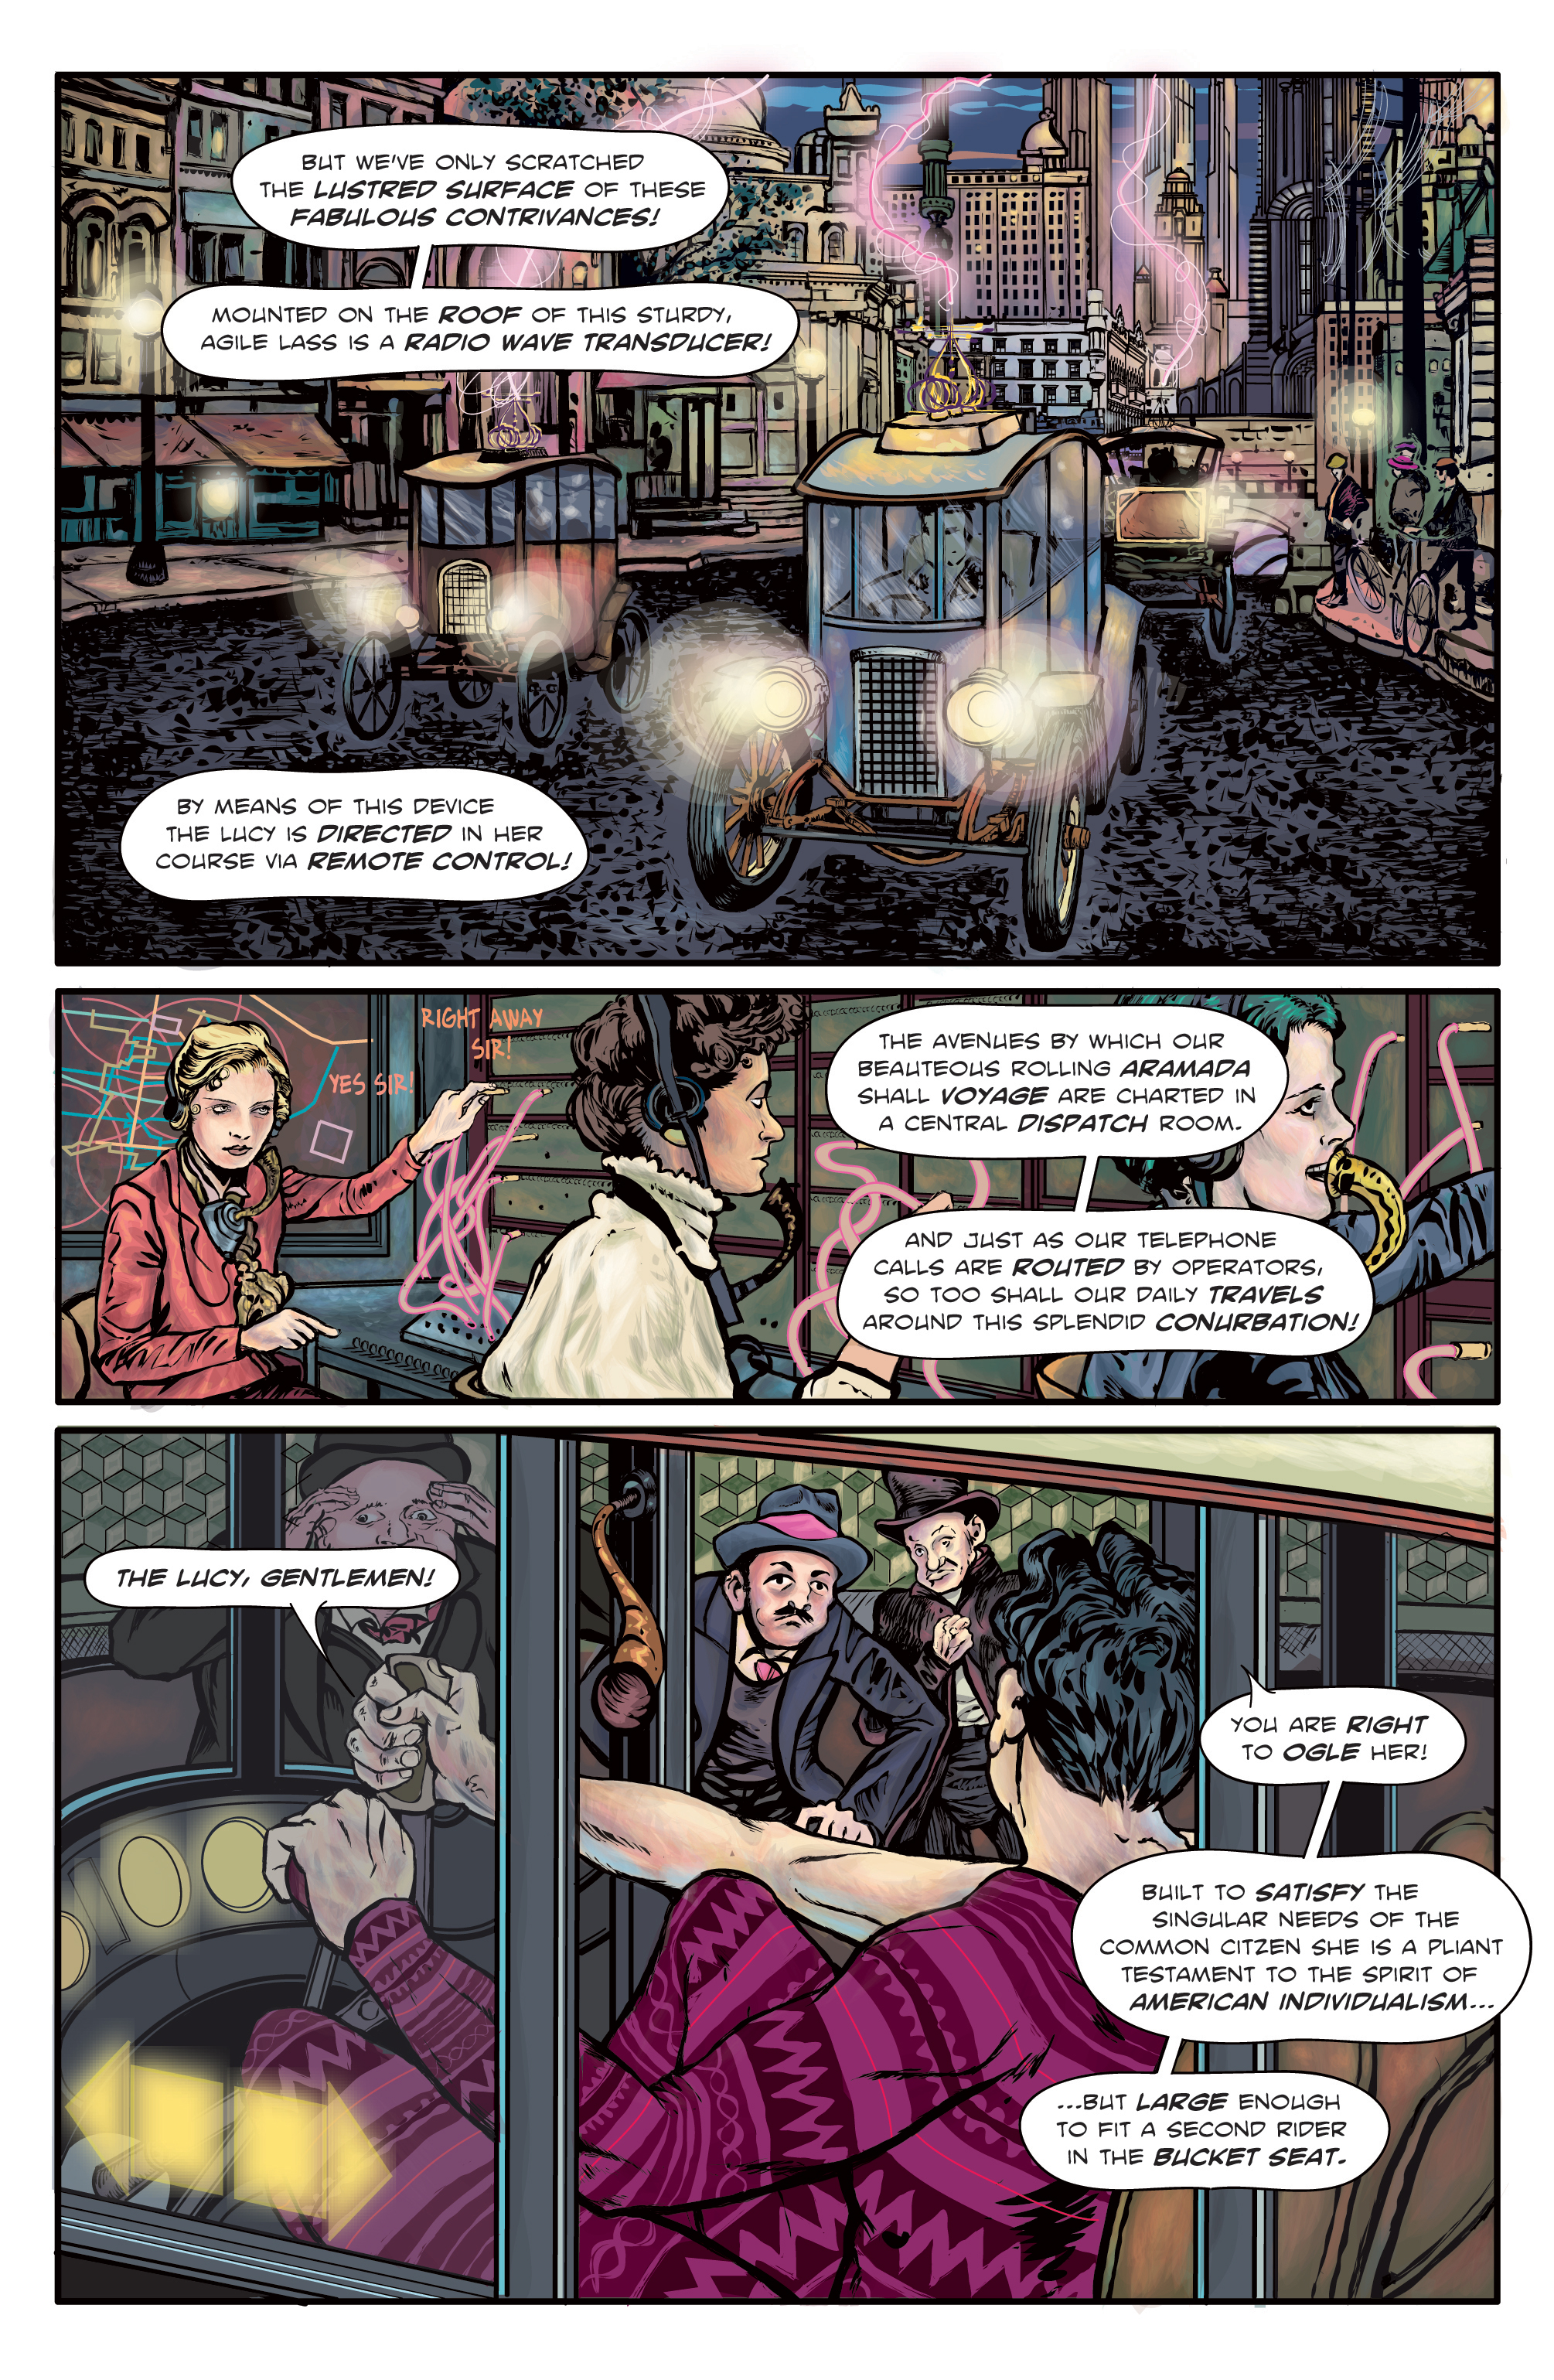 The Enchanted Dagger #3 -Page 3